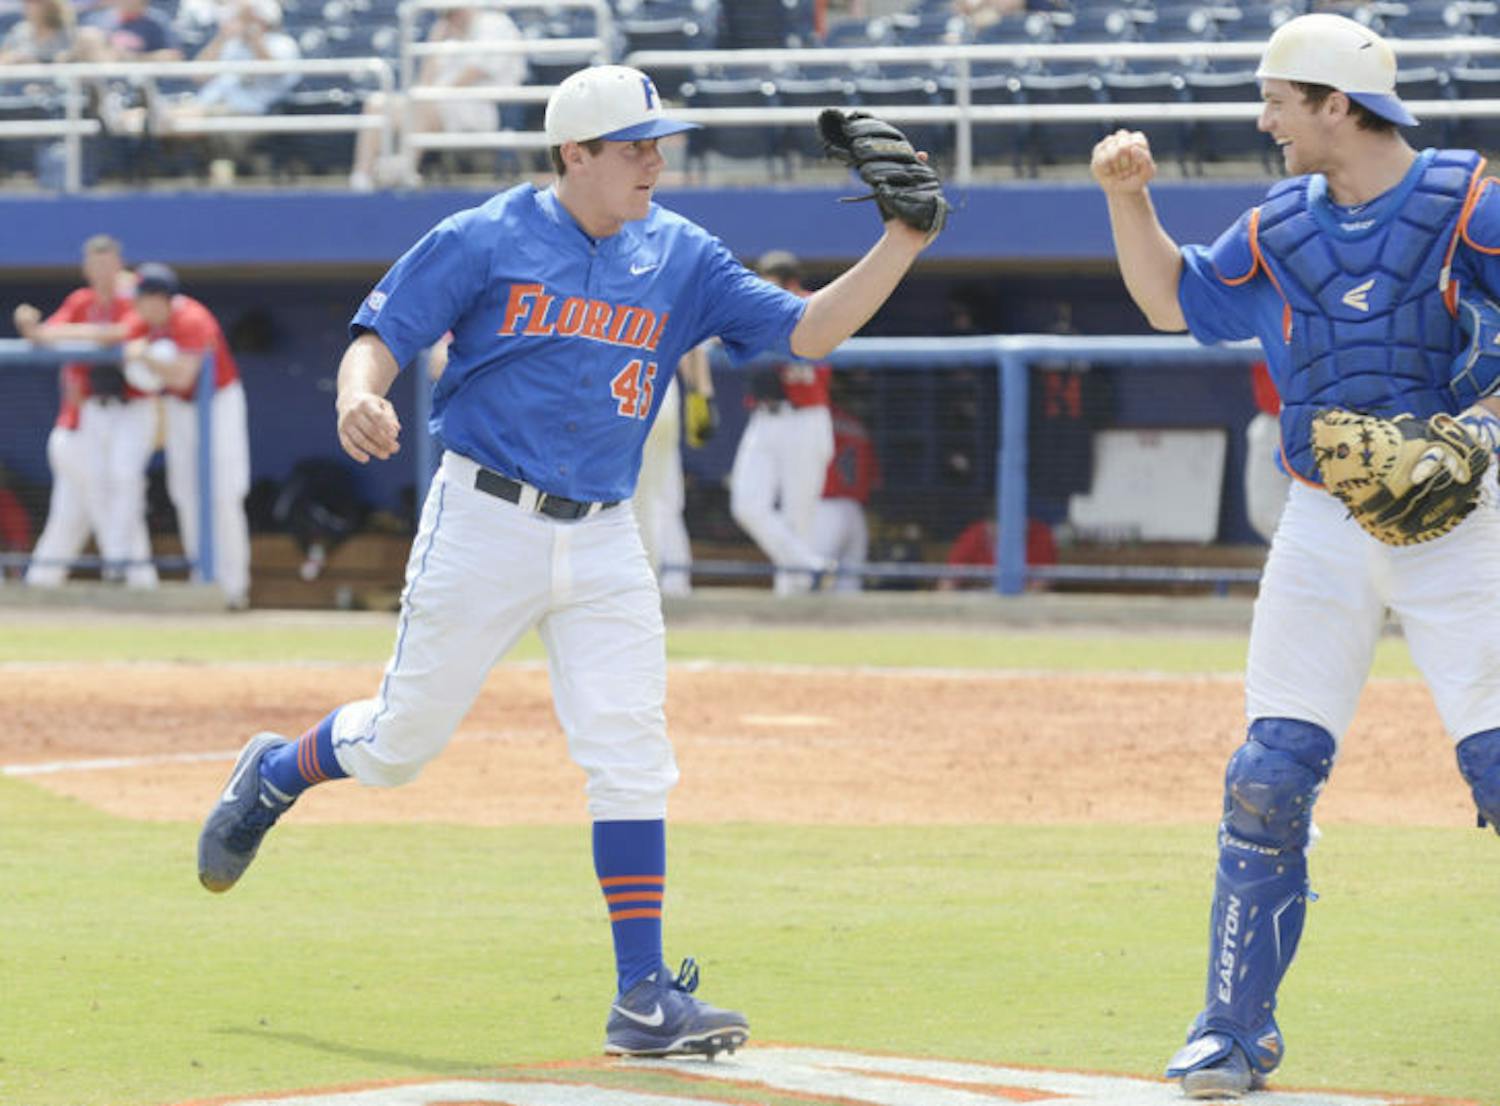 Right-handed pitcher Johnny Magliozzi (left) celebrates with catcher Taylor Gushue during Florida’s 4-0 win against Ole Miss on March 31 at McKethan Stadium.&nbsp;